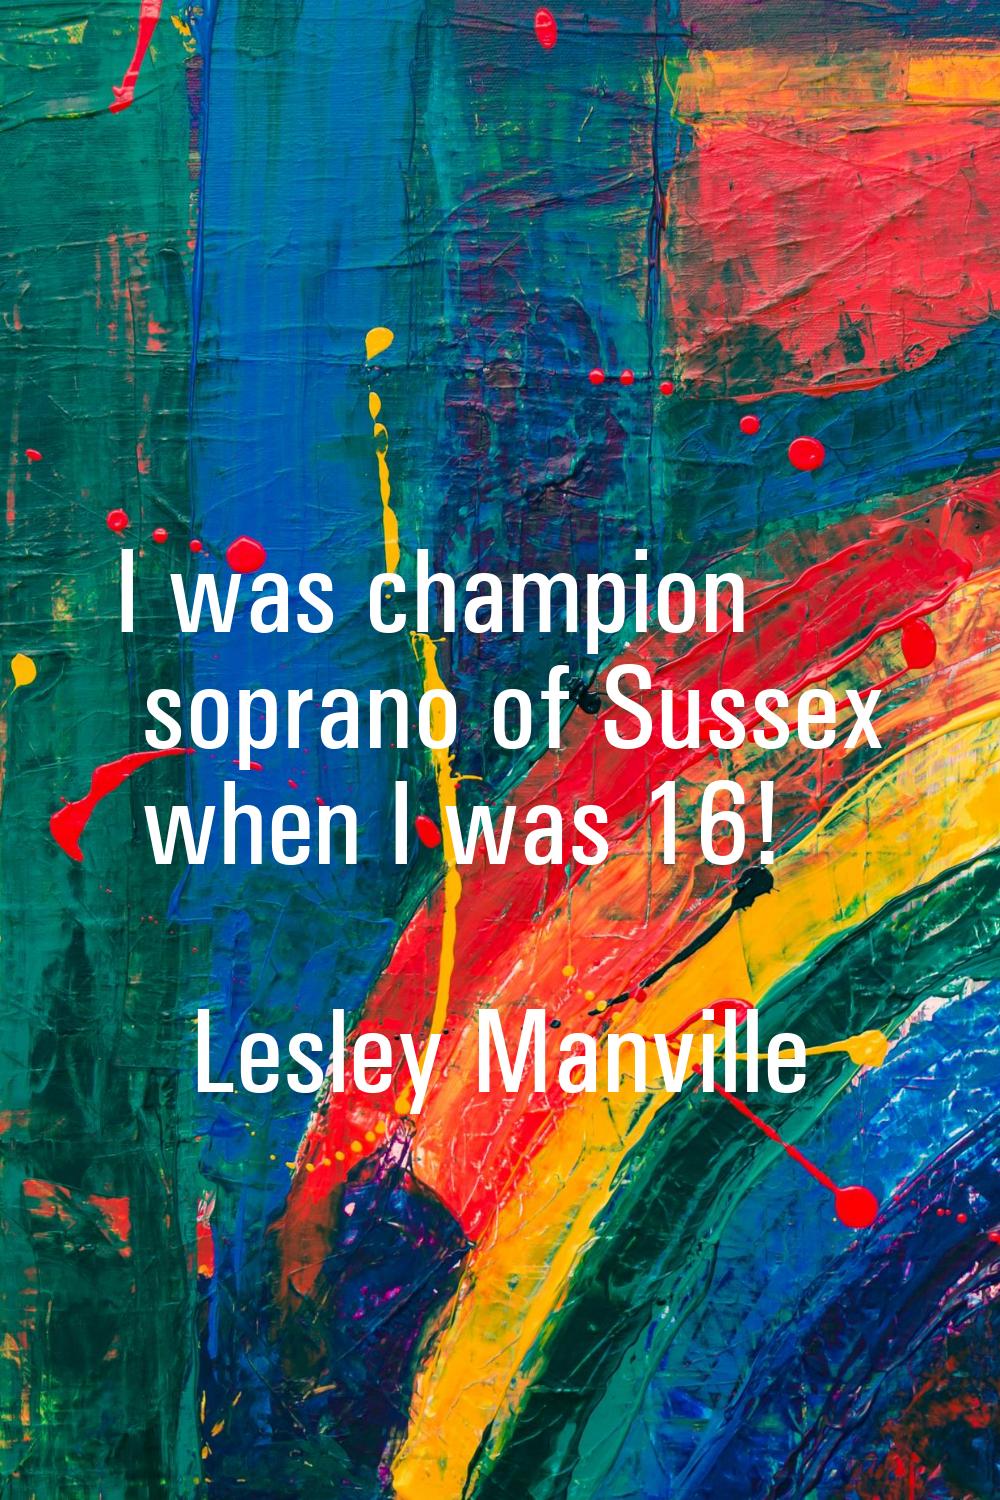 I was champion soprano of Sussex when I was 16!